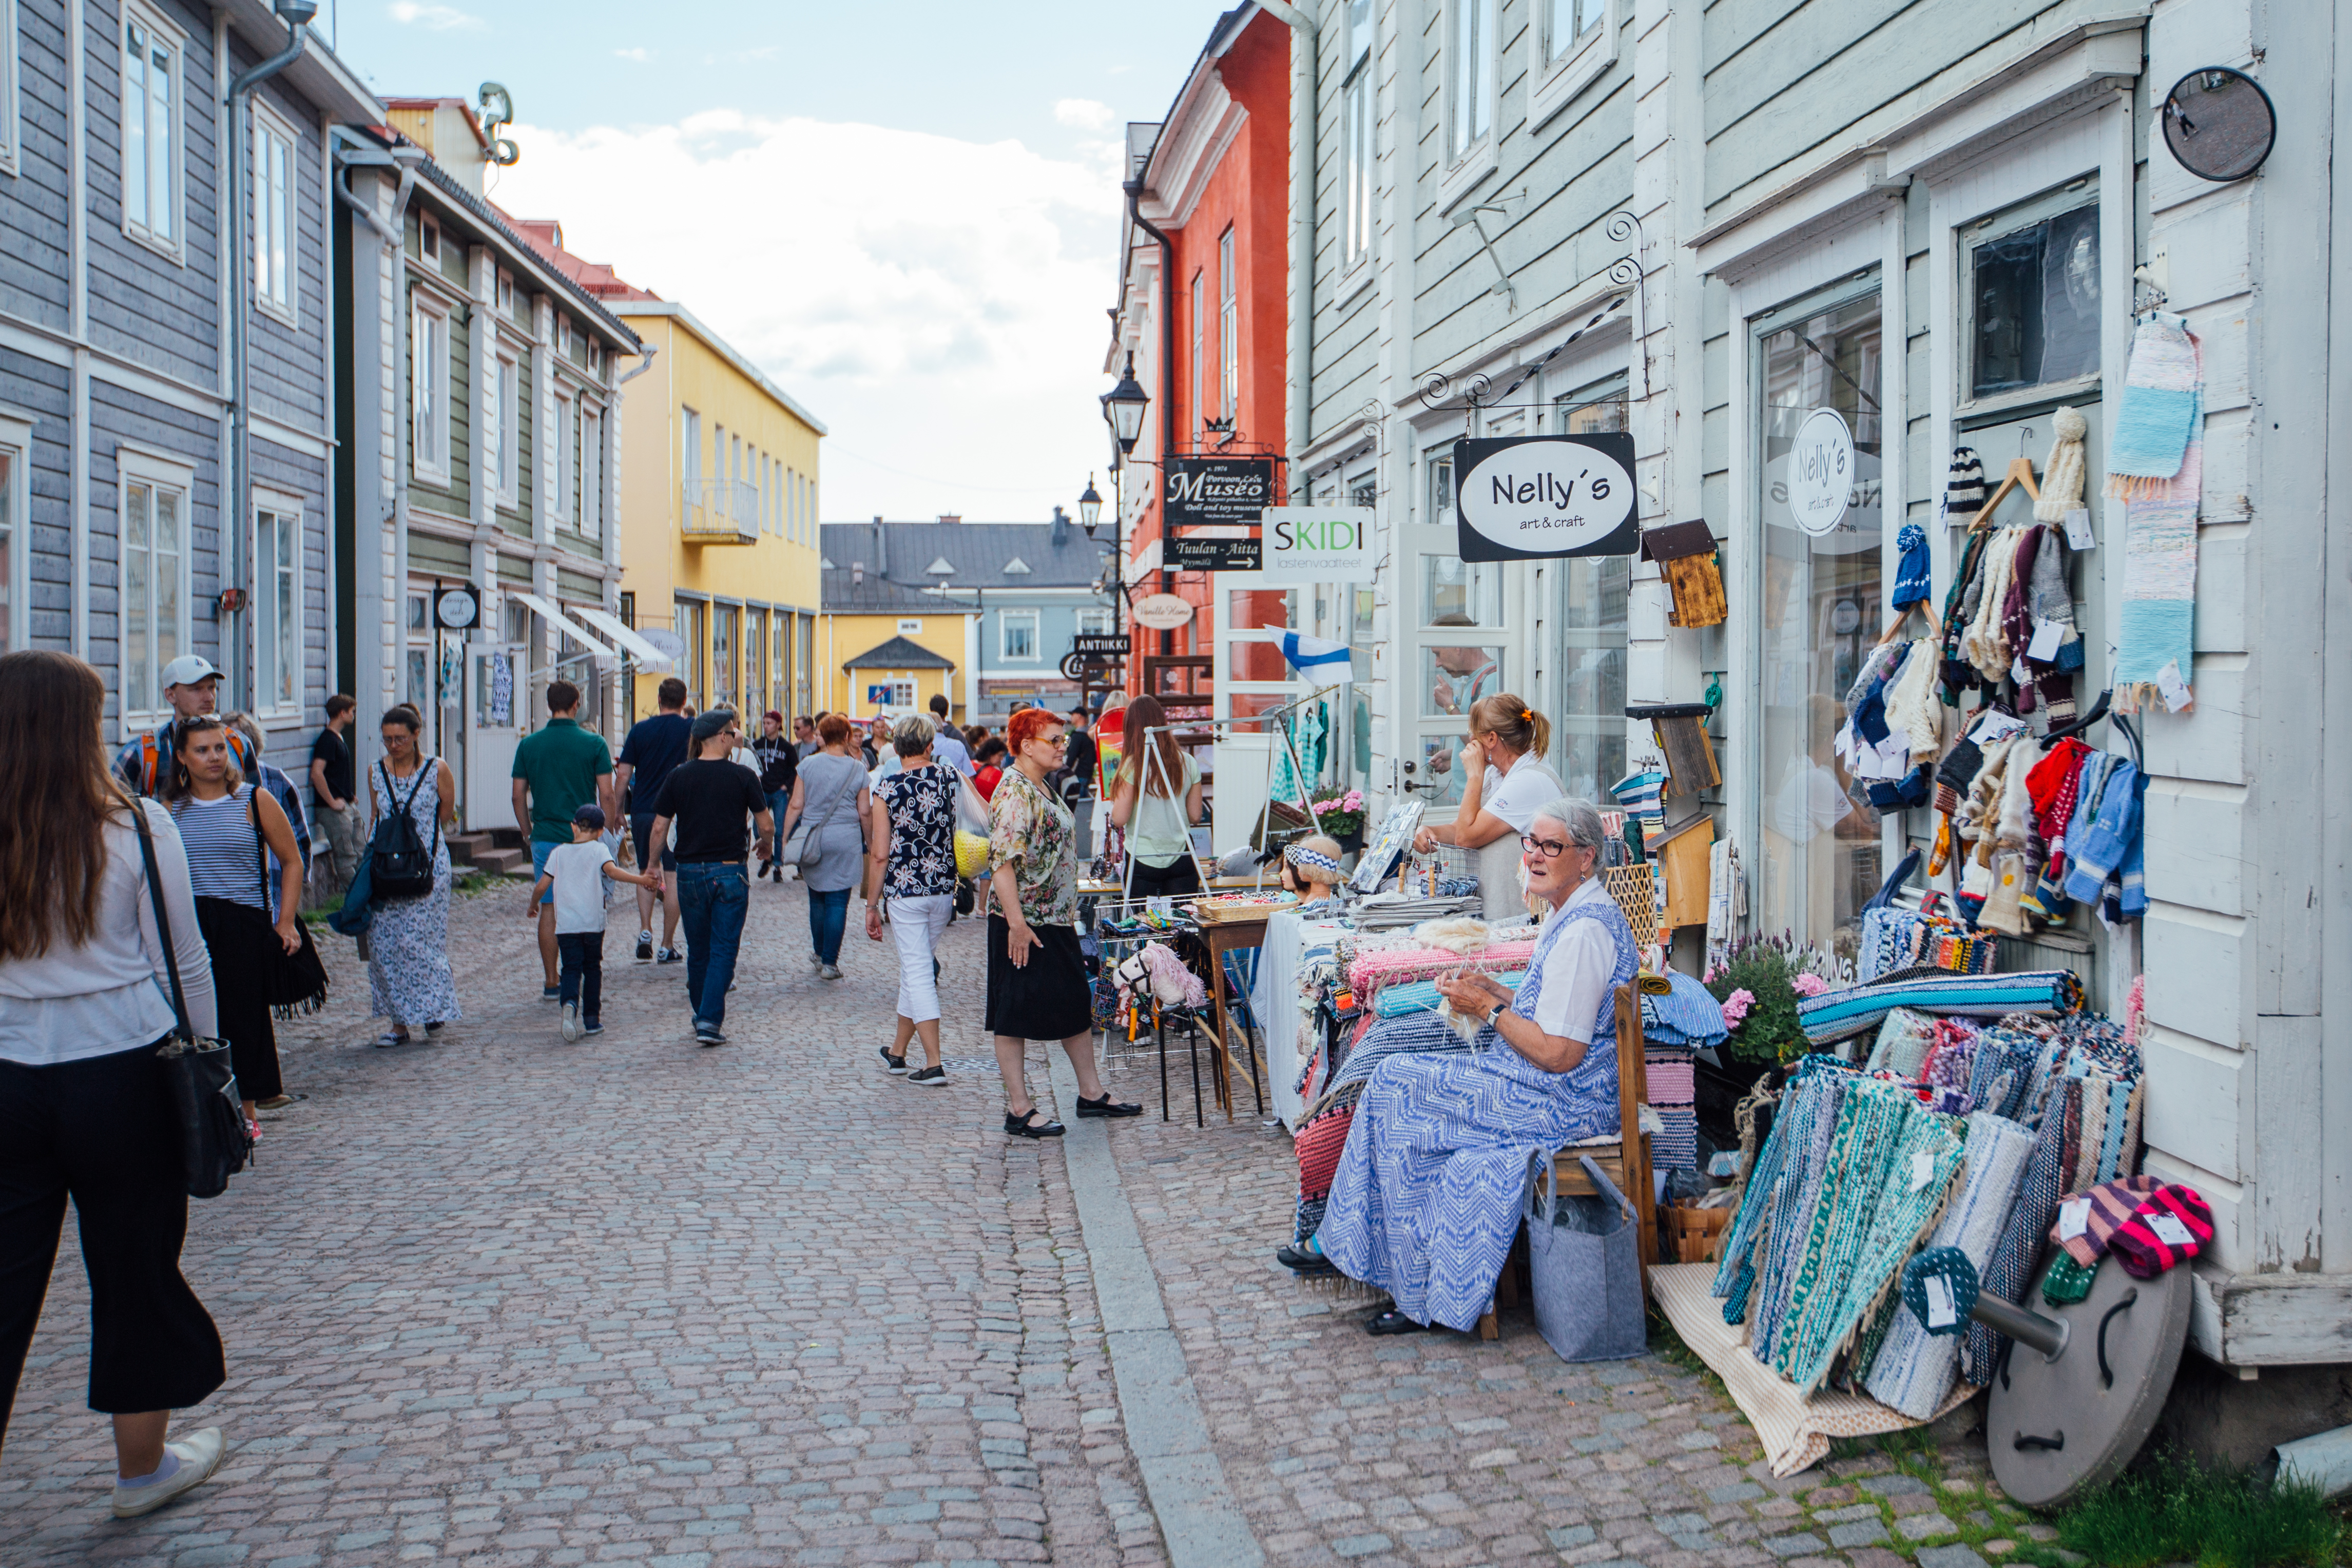 A street view of a cozy old wooden town full of people and shops